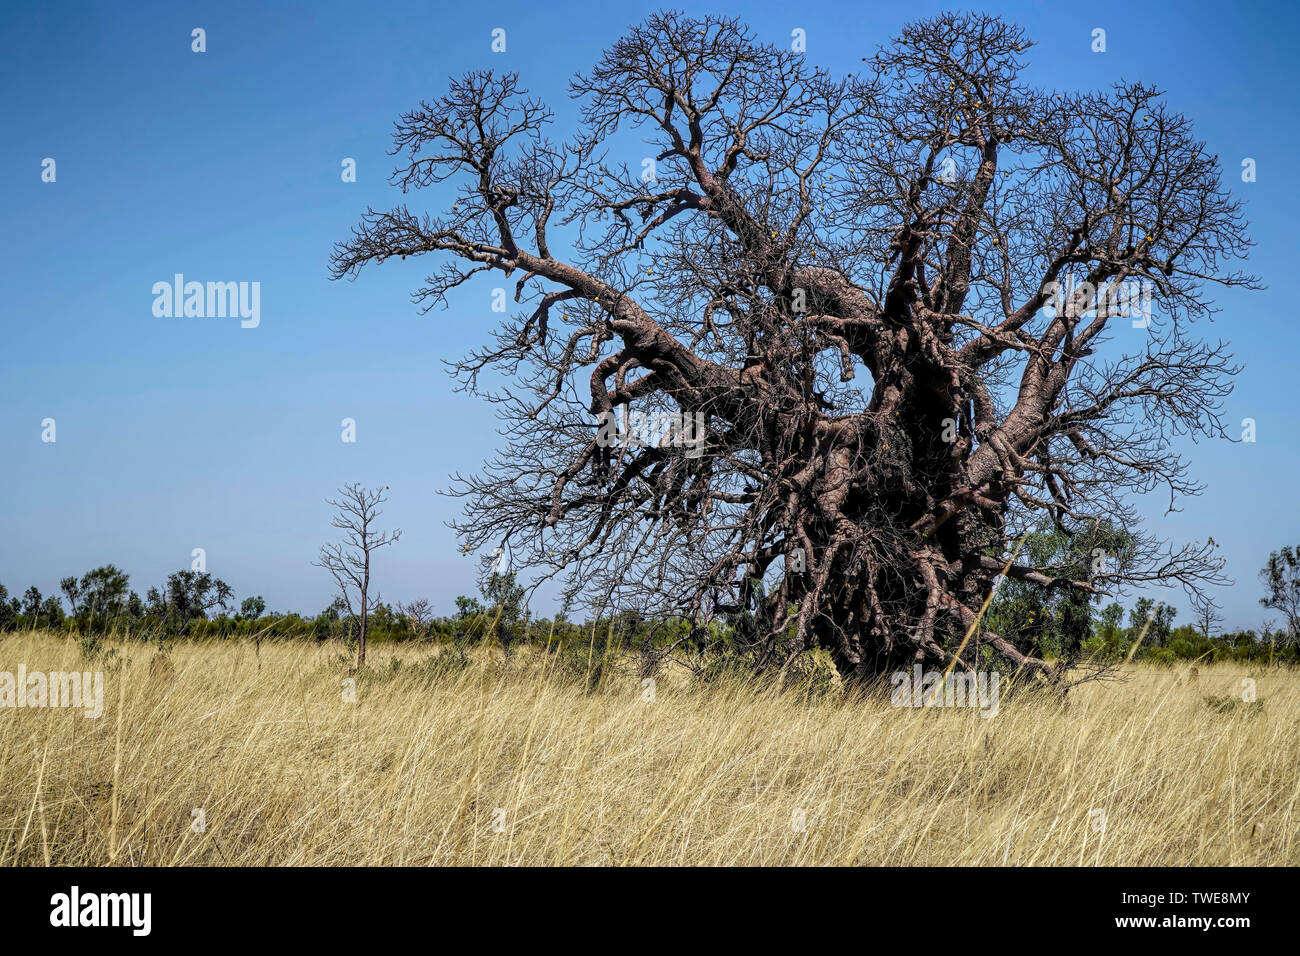 Very old Boab Tree with no leaves and grass in the foreground Stock Photo